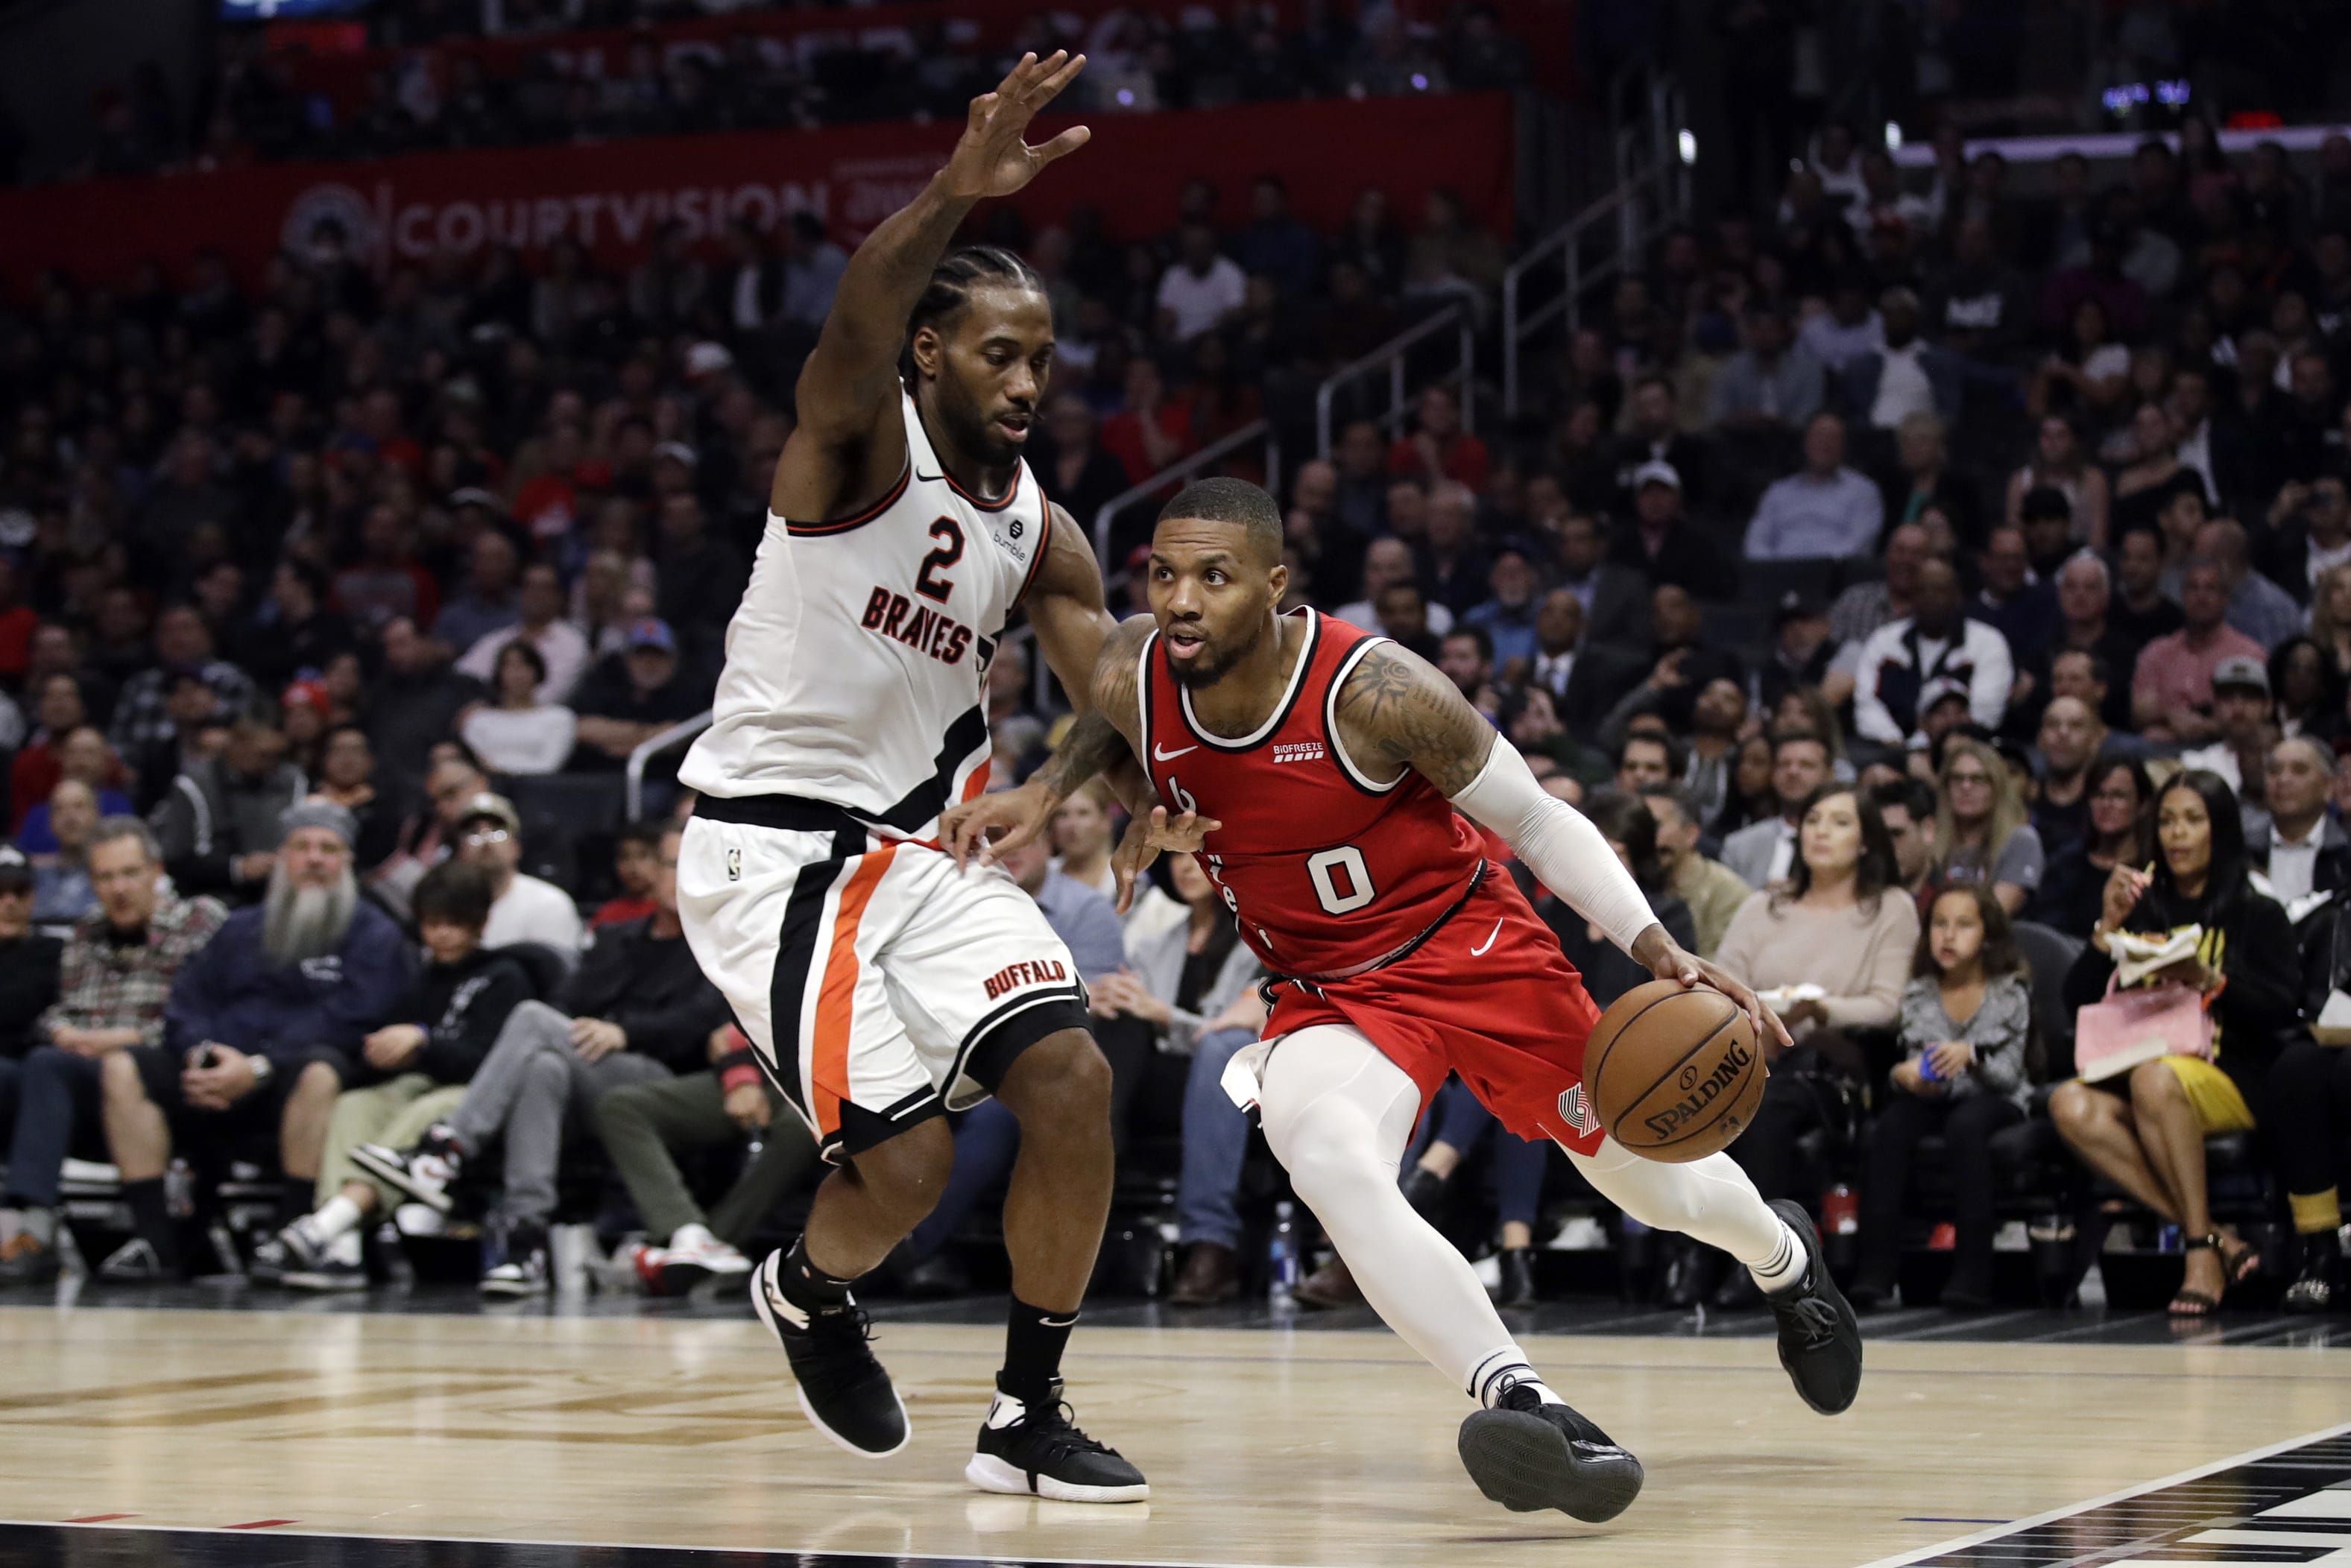 Portland Trail Blazers' Damian Lillard (0) dribbles next to Los Angeles Clippers' Kawhi Leonard (2) during the first half of an NBA basketball game Thursday, Nov. 7, 2019, in Los Angeles.